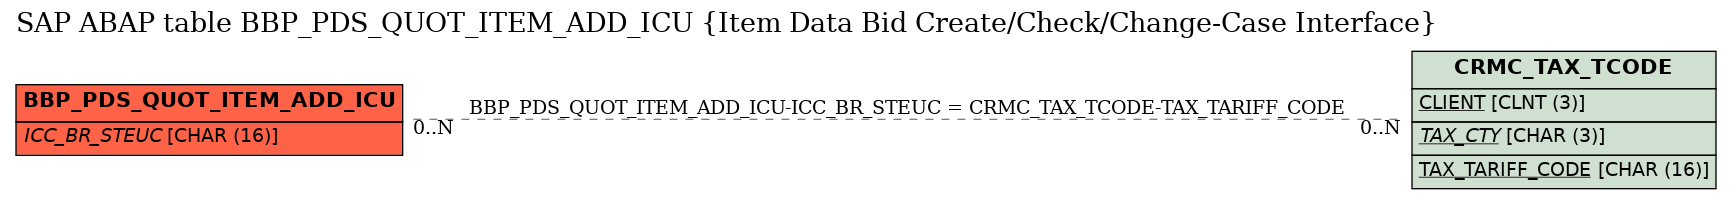 E-R Diagram for table BBP_PDS_QUOT_ITEM_ADD_ICU (Item Data Bid Create/Check/Change-Case Interface)